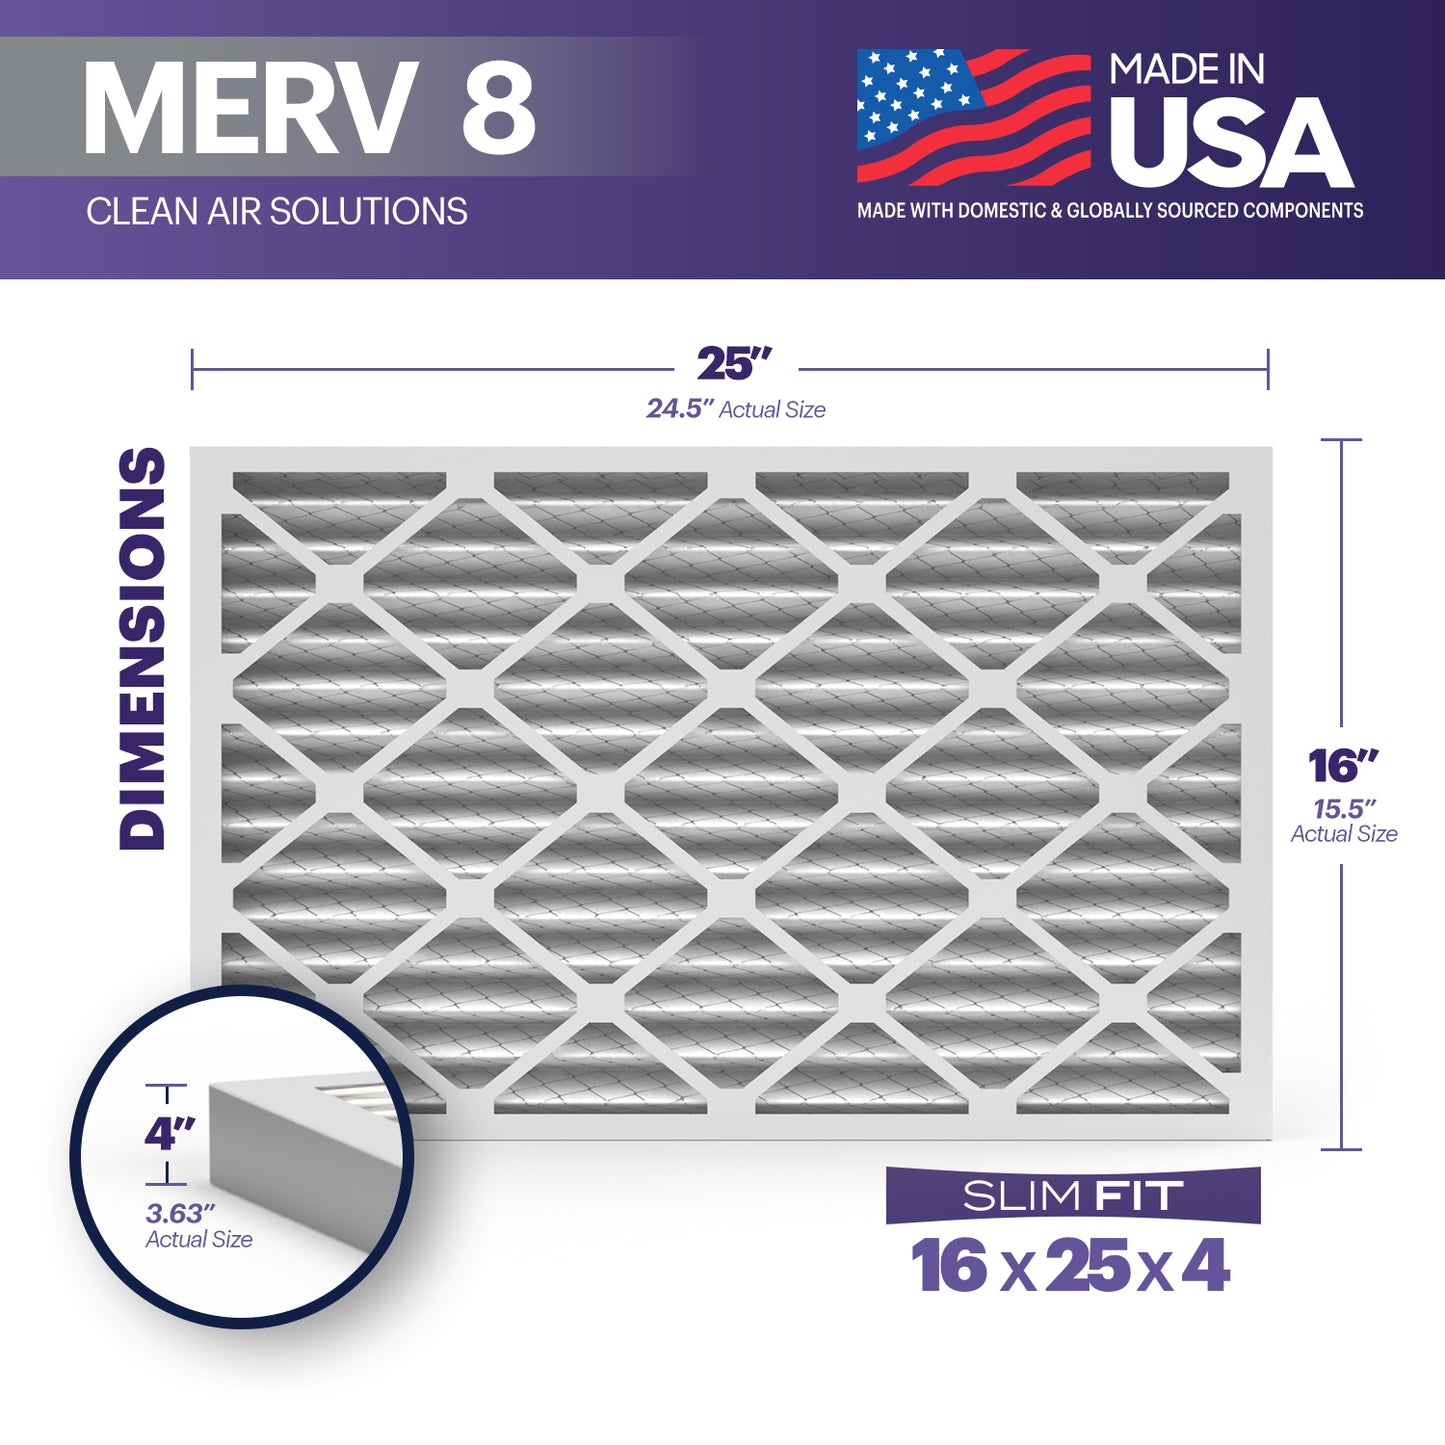 BNX TruFilter 16x25x4 MERV 8 Pleated Air Filter – Made in USA (2-Pack)